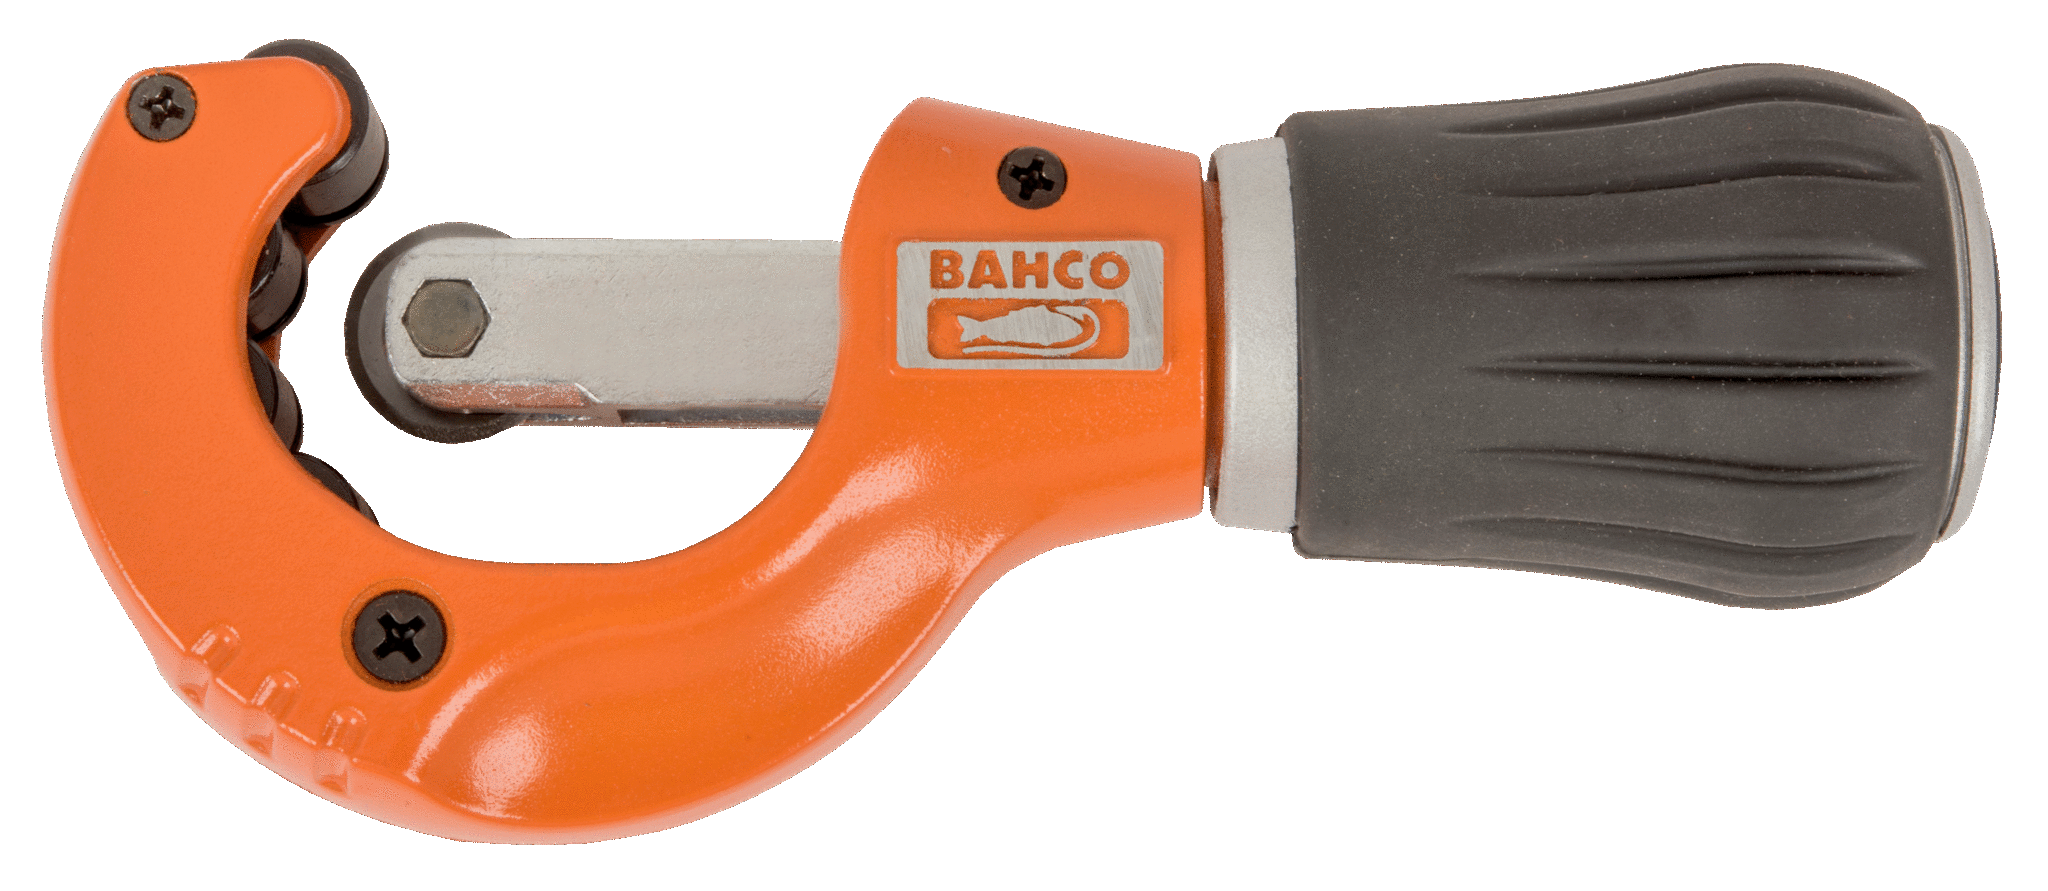 Tube Cutter 8-35 mm - 302-35 by Bahco